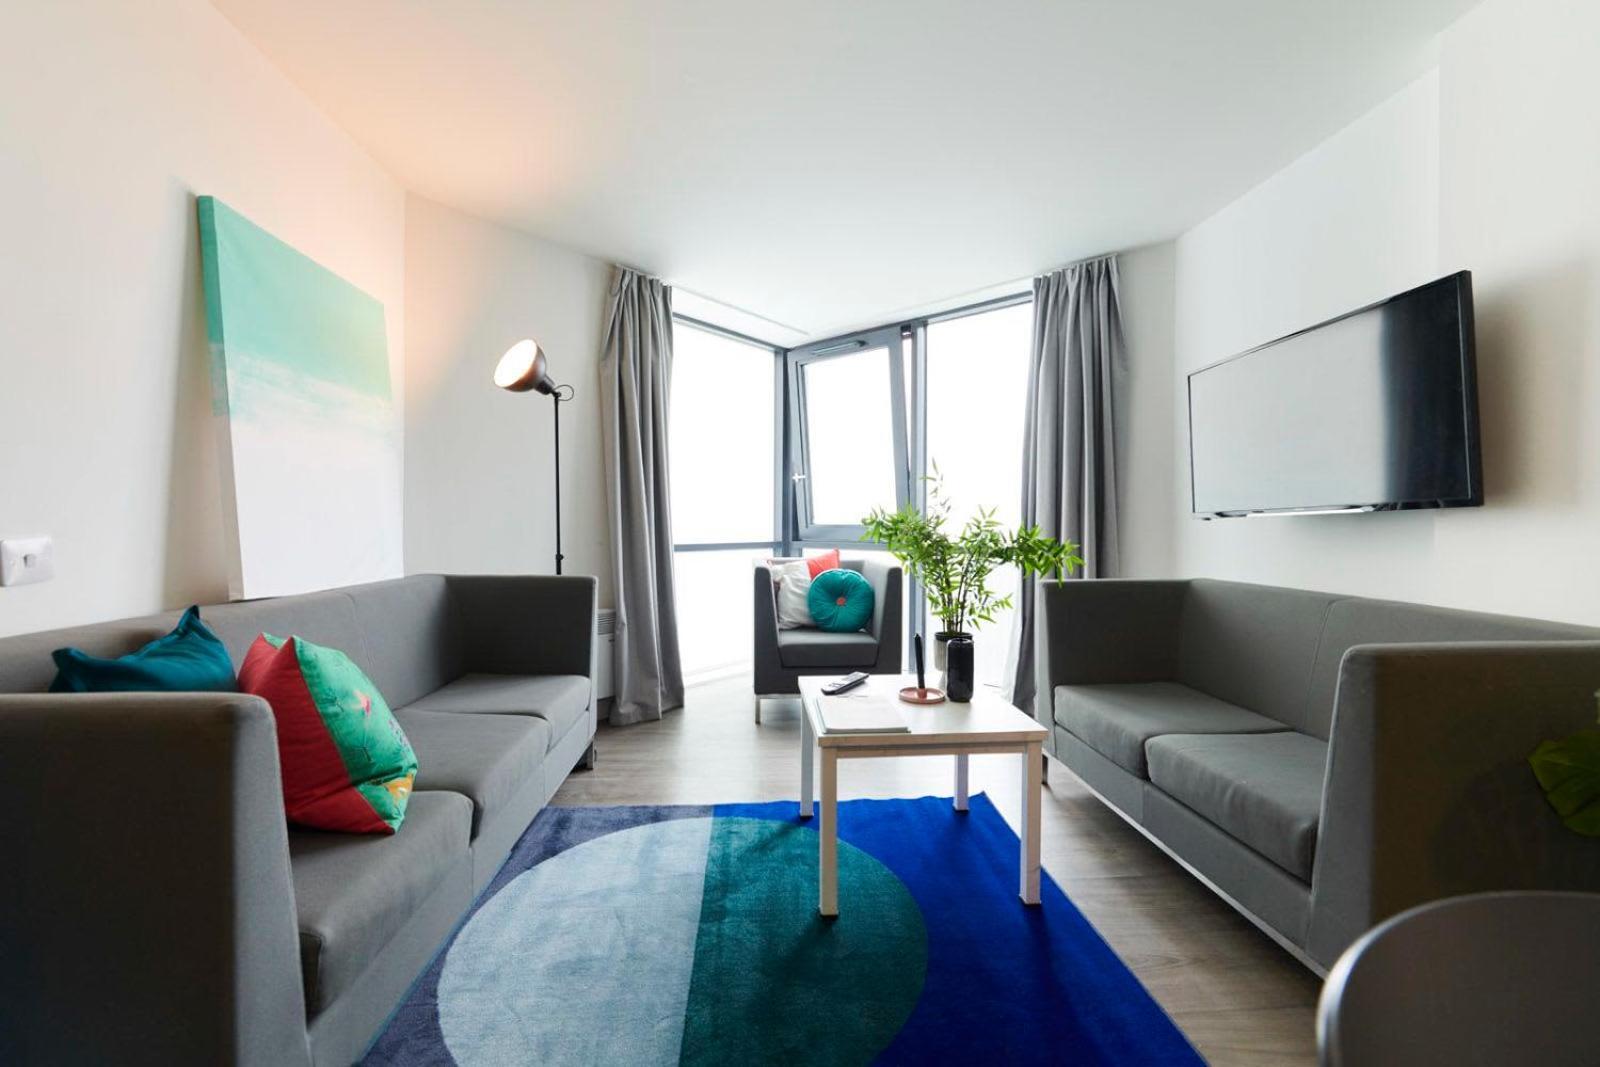 Chic Apartments And Private Bedrooms At Beckett House Near Dublin City Centre 外观 照片